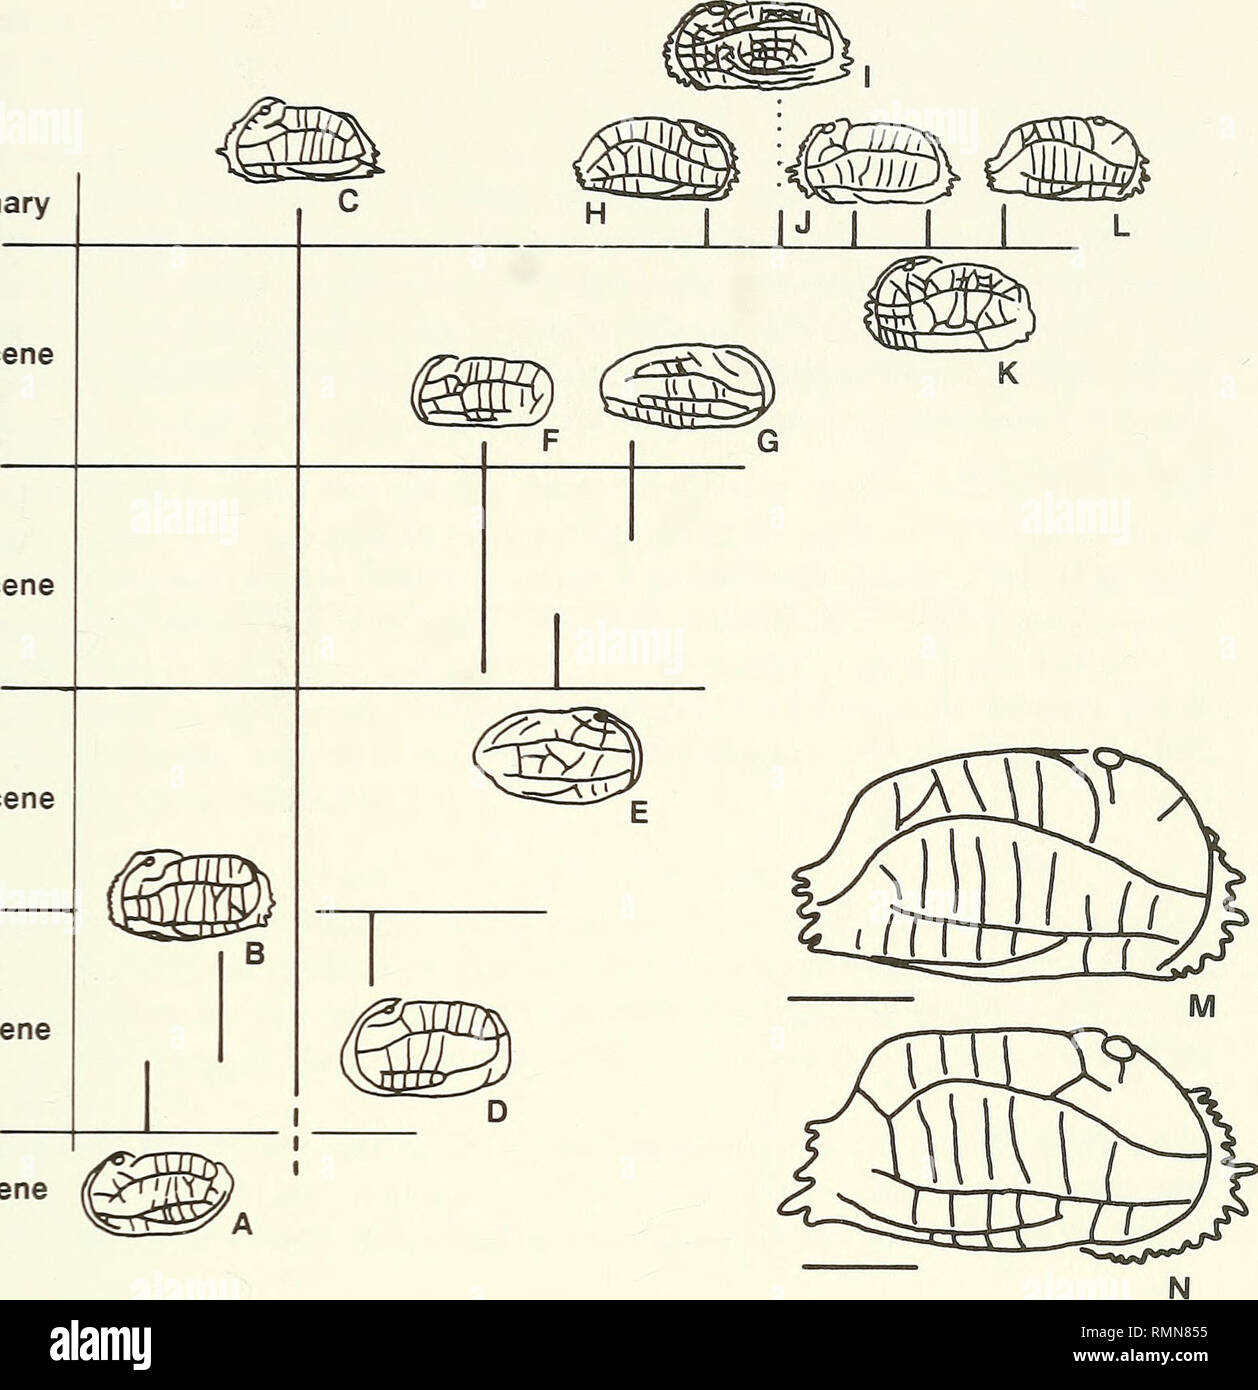 . Annals of the South African Museum = Annale van die Suid-Afrikaanse Museum. Natural history. QUATERNARY OSTRACODS FROM SOUTH-WESTERN AFRICA 31 Quaternary Pliocene Miocene Oligocene Eocene Palaeocene. Fig. 19. Stratigraphic distribution of the genus Chrysocythere in west and south-western Africa, based on references cited in the text. A. ?Chrysocythere dahomeyi (Apostolescu, 1961). B. Chrysocythere sp. A096 Frewin, 1987. C. C. craticula (Brady, 1880). D. Chrysocythere sp. (Dingle, 1976). E. C. hexa- striata van den Bold, 1966. ¥. C. cataphracta Ruggieri, 1962. G. C. foveostriata (Brady, 1870) Stock Photo